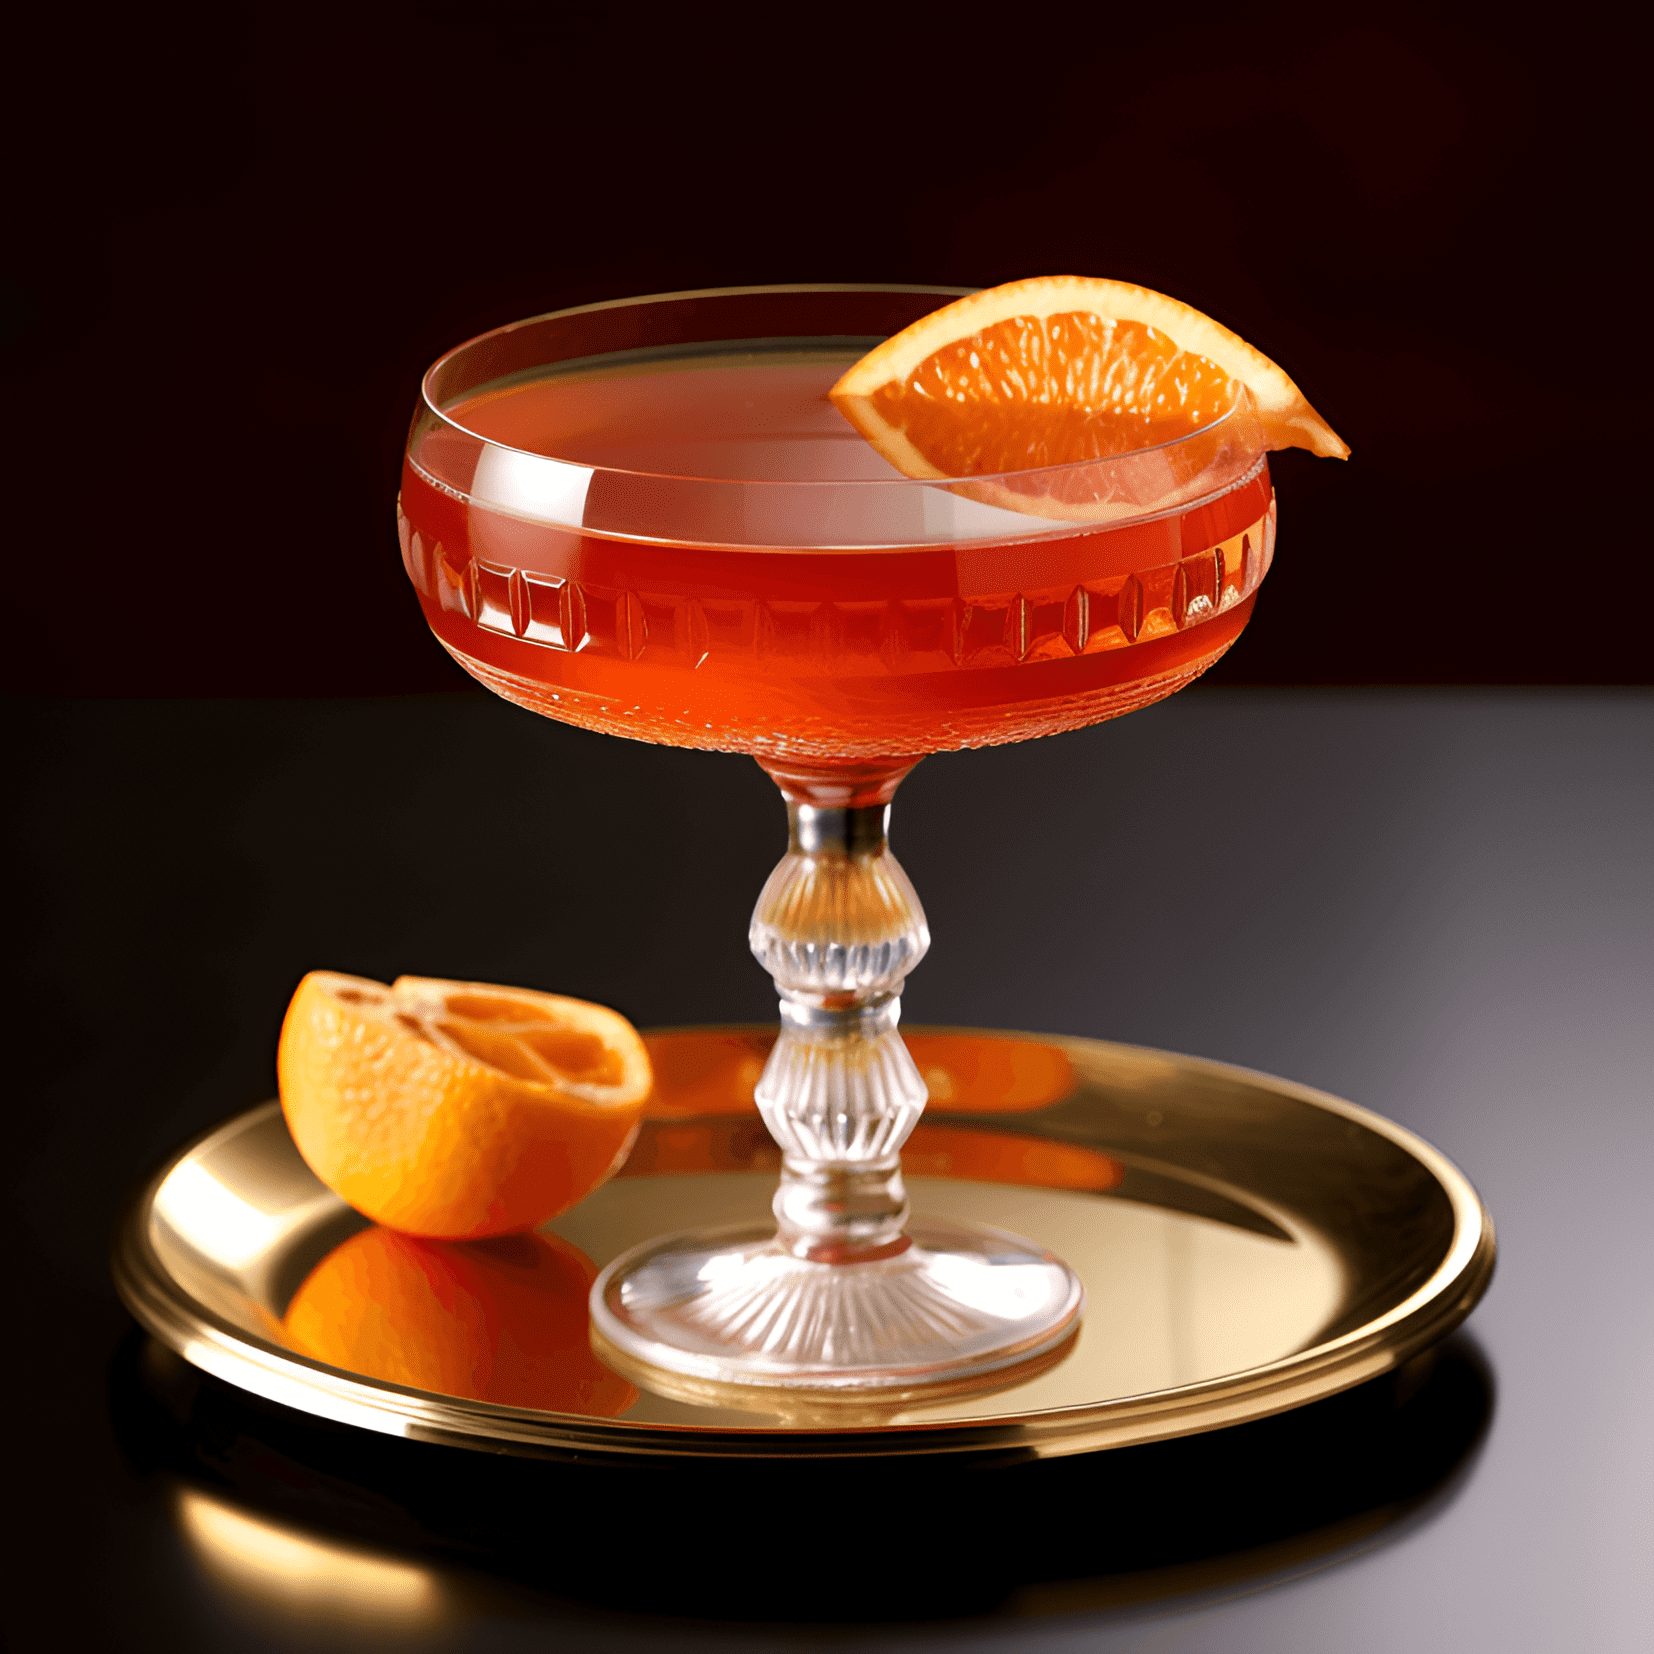 Riviera Cocktail Recipe - The Riviera cocktail has a balanced and refreshing taste, with a combination of sweet, sour, and bitter flavors. It is light and crisp, with a hint of citrus and a subtle herbal undertone.